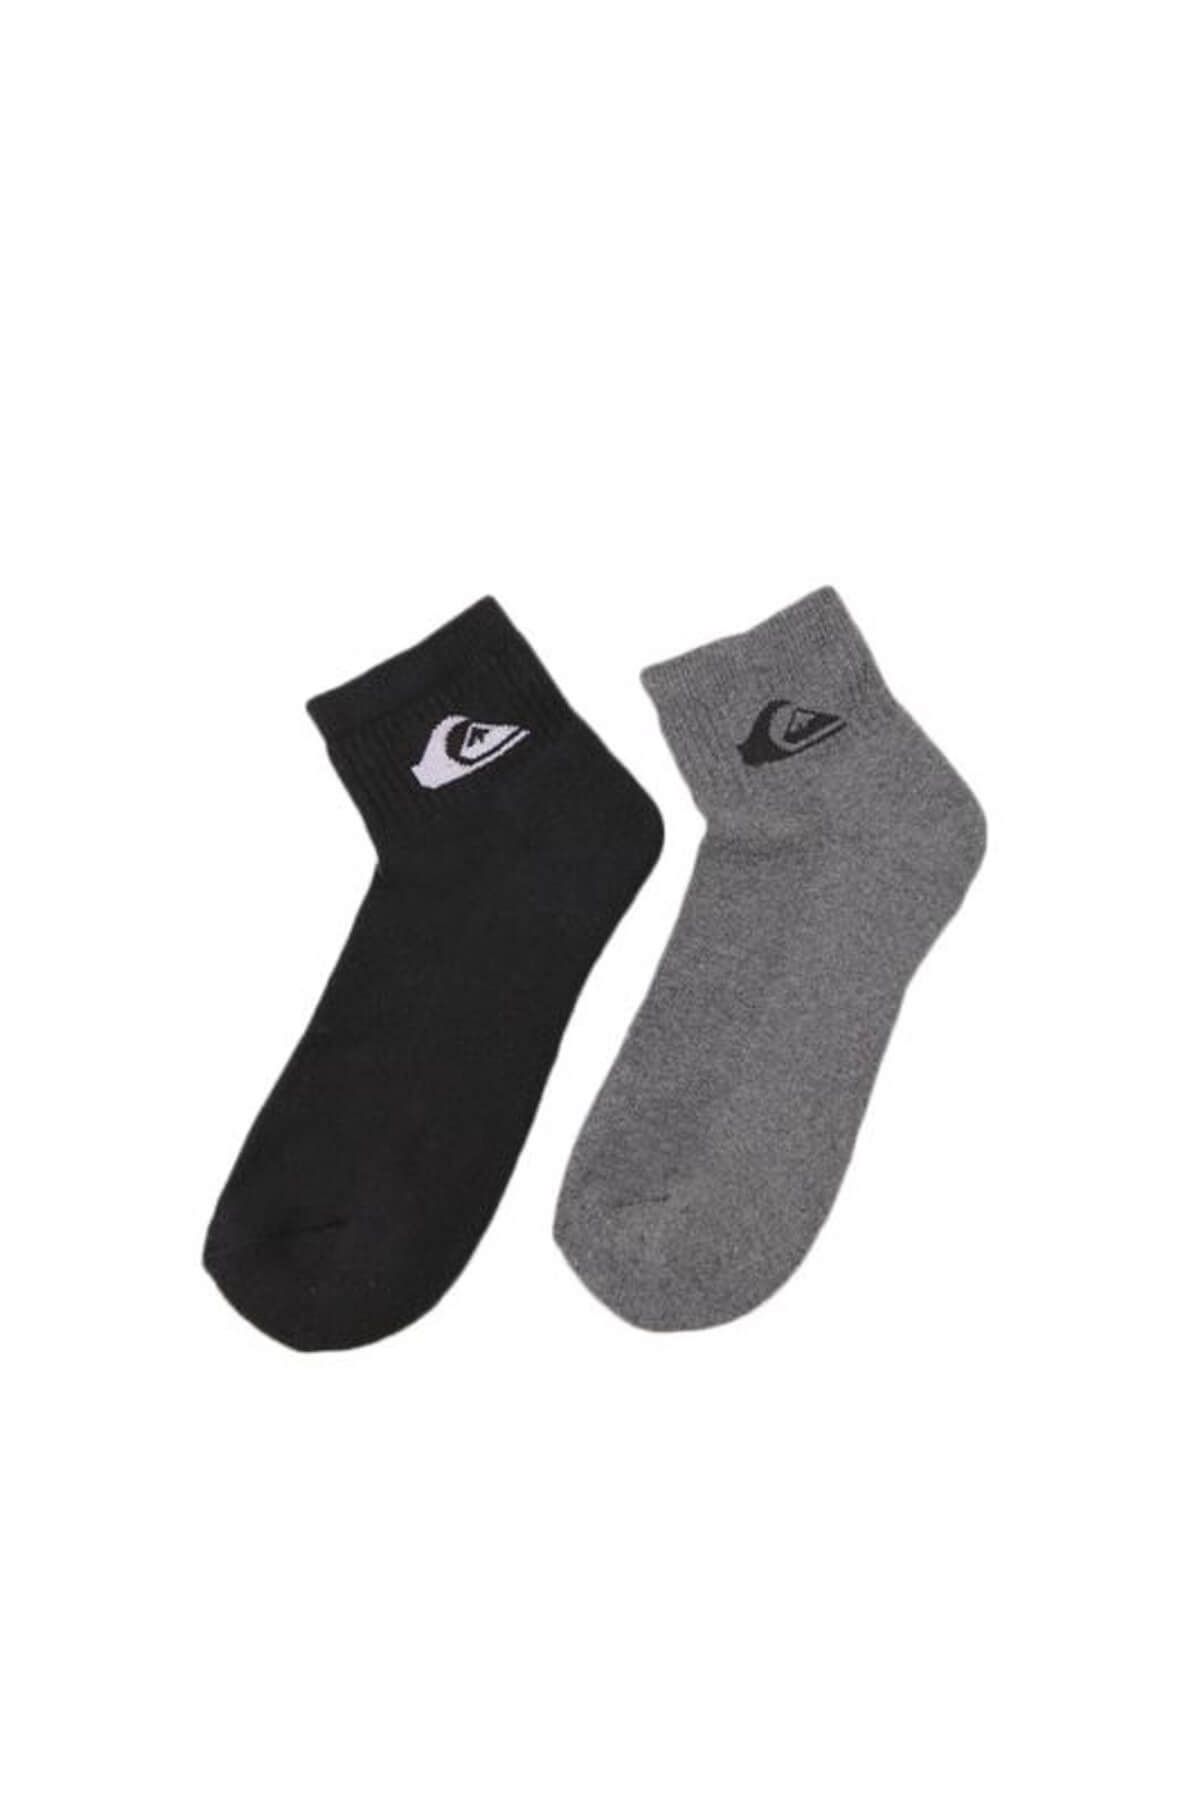 Quiksilver EVERYDAY M LOW CUT SOCKS 2 PACK GREY AND BLACK